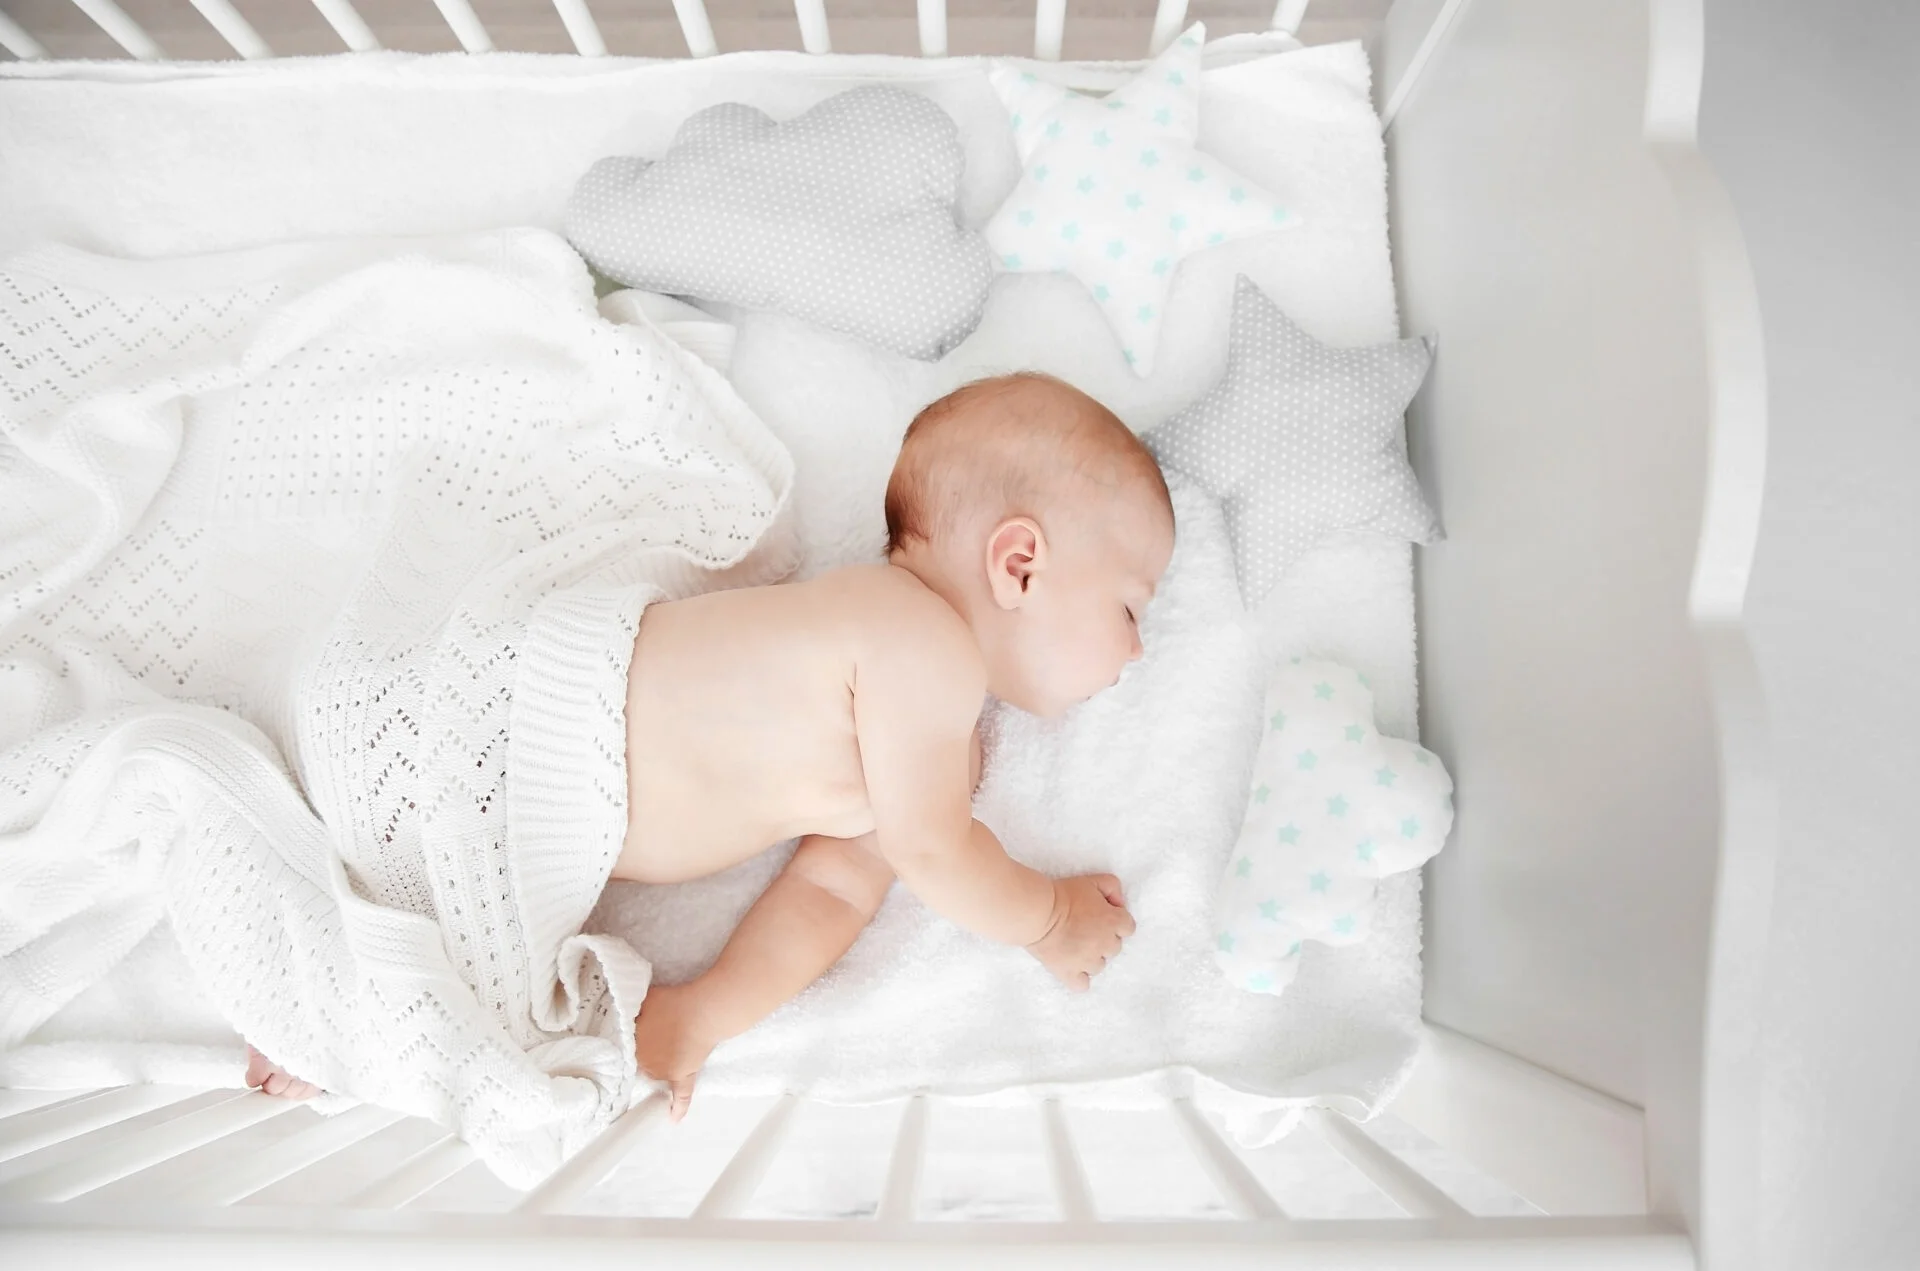 Baby sleeping on toxic Nook Pure Organic crib mattress full of PFAS "forever chemicals" 